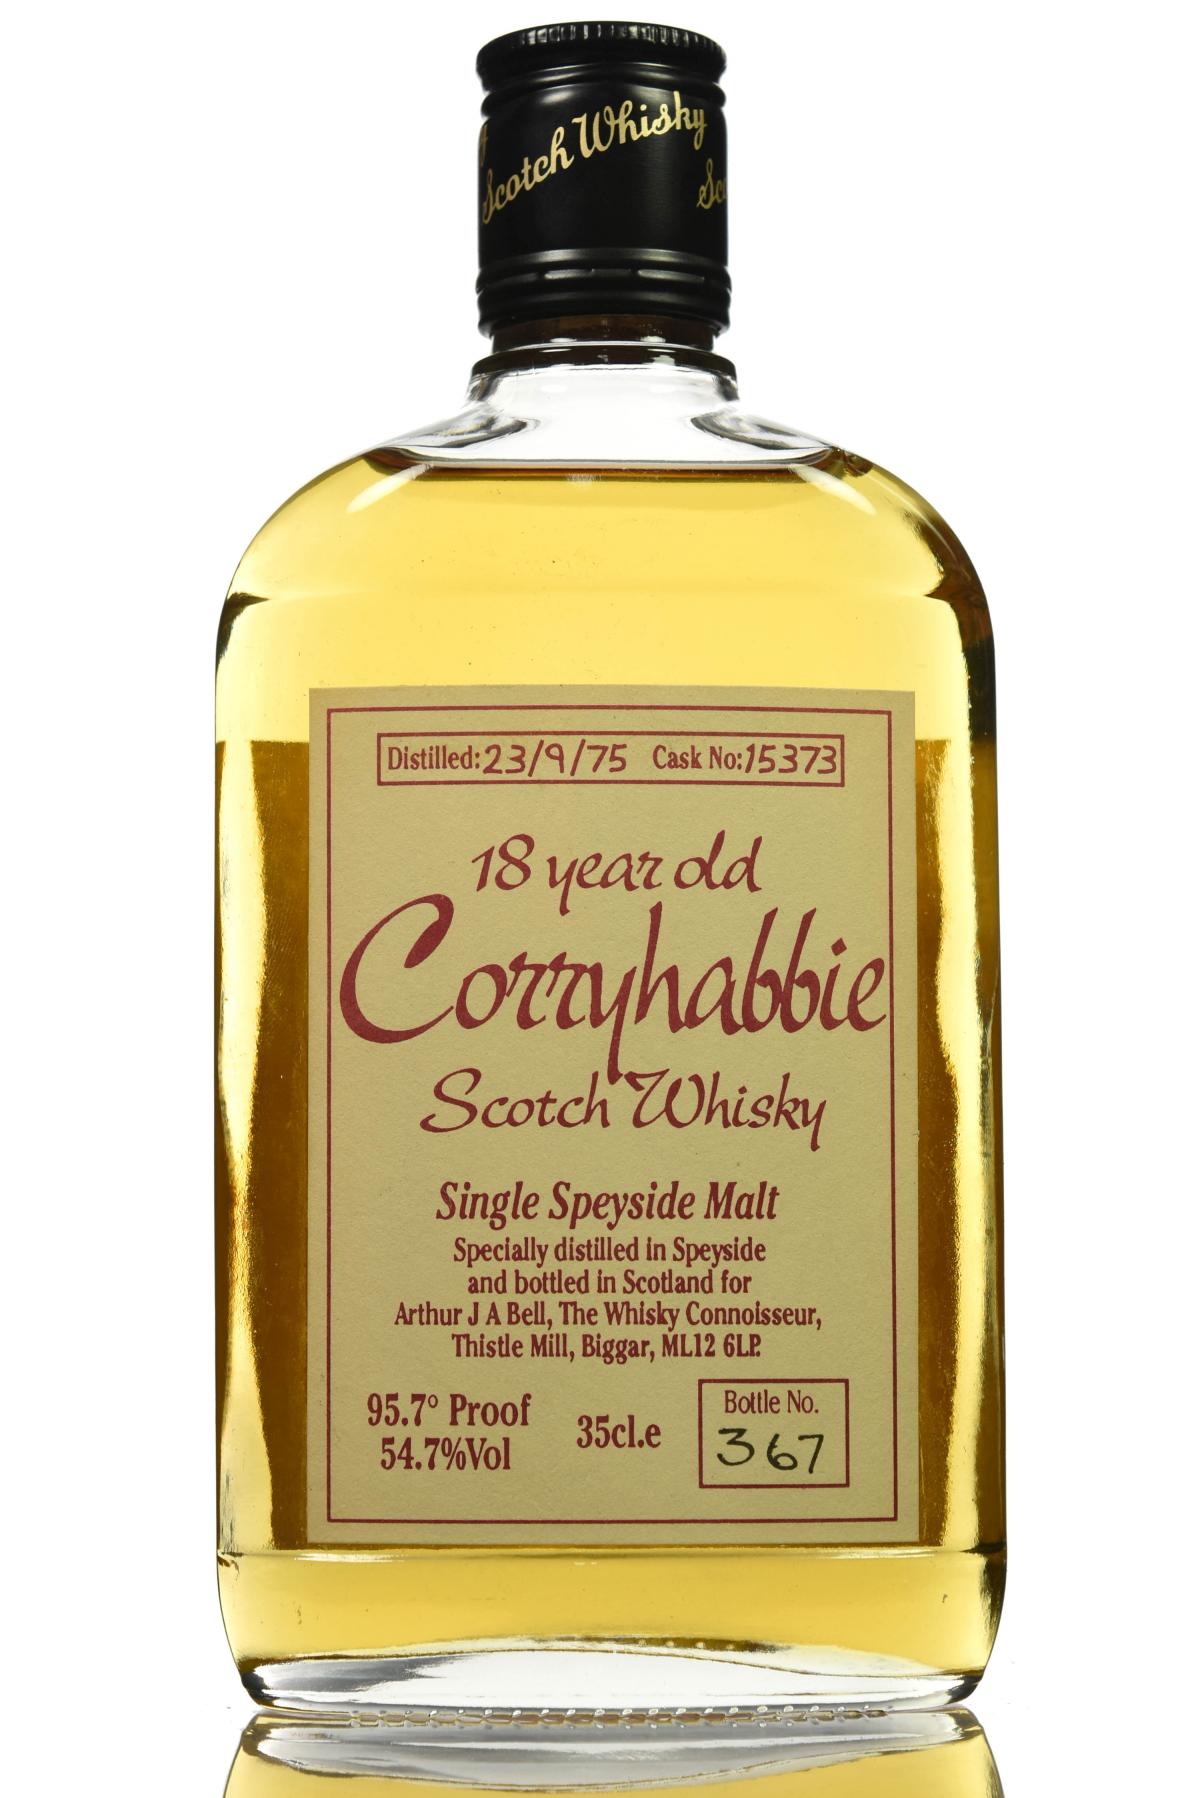 Corryhabbie 1975 - 18 Year Old -  Cask 15373 - 35cl